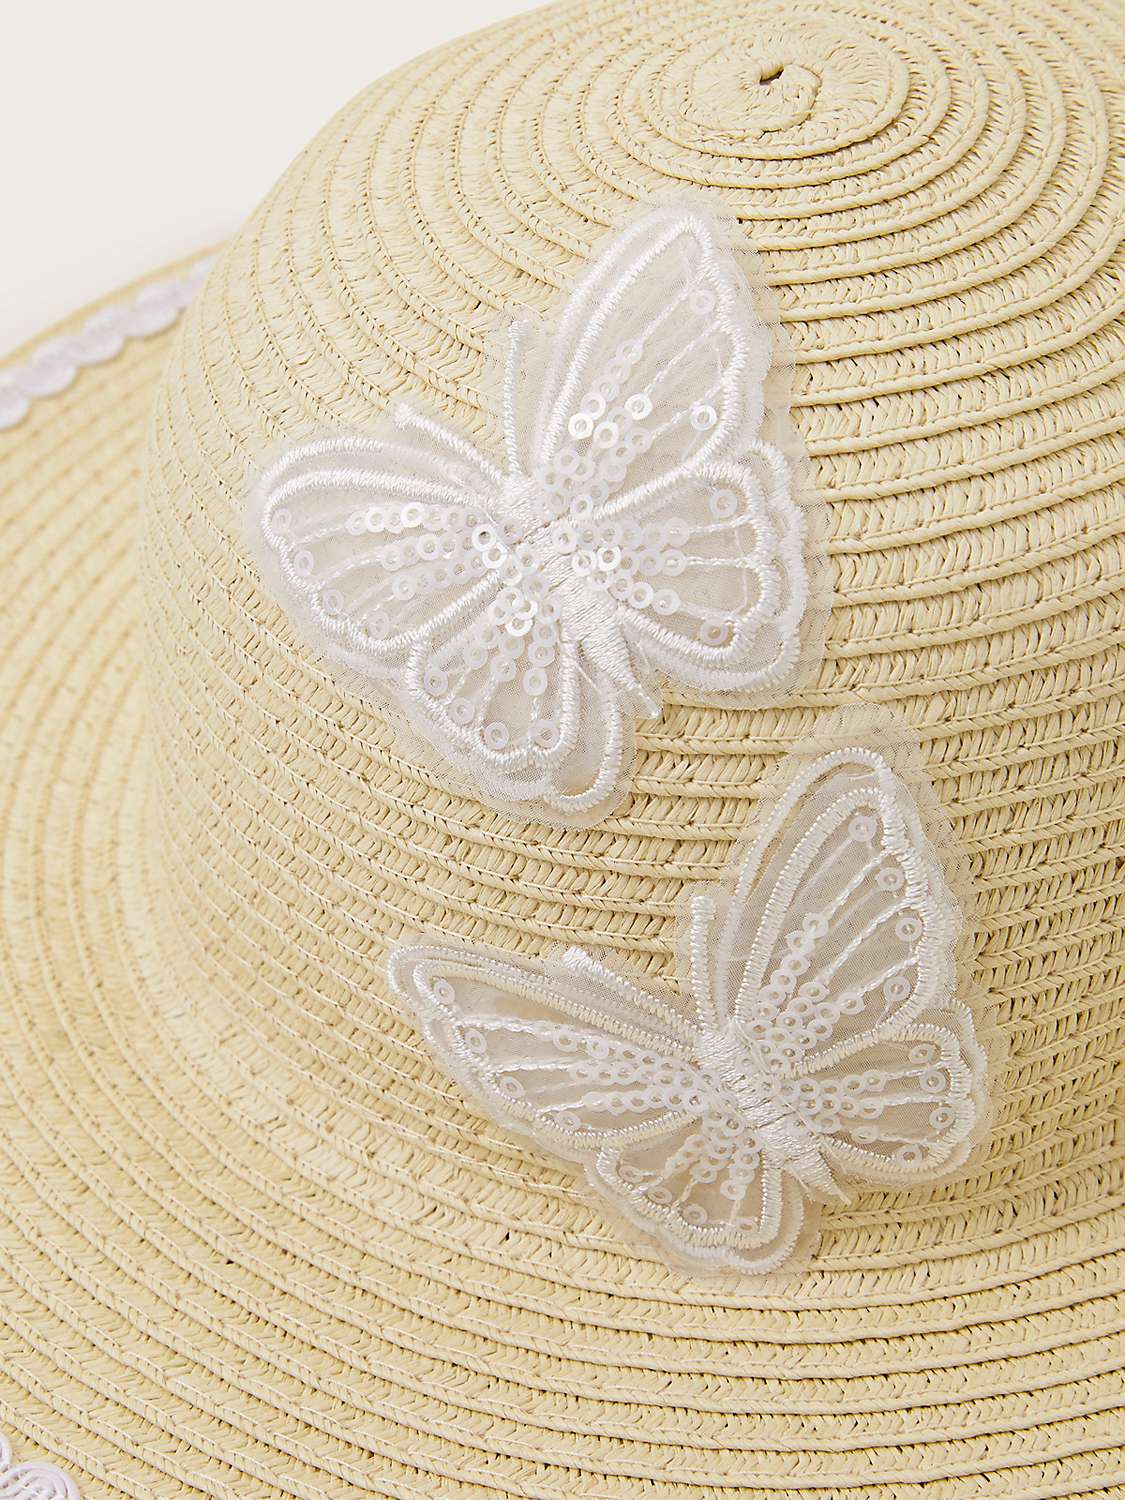 Buy Monsoon Baby Butterfly Floppy Hat, Neutral Online at johnlewis.com